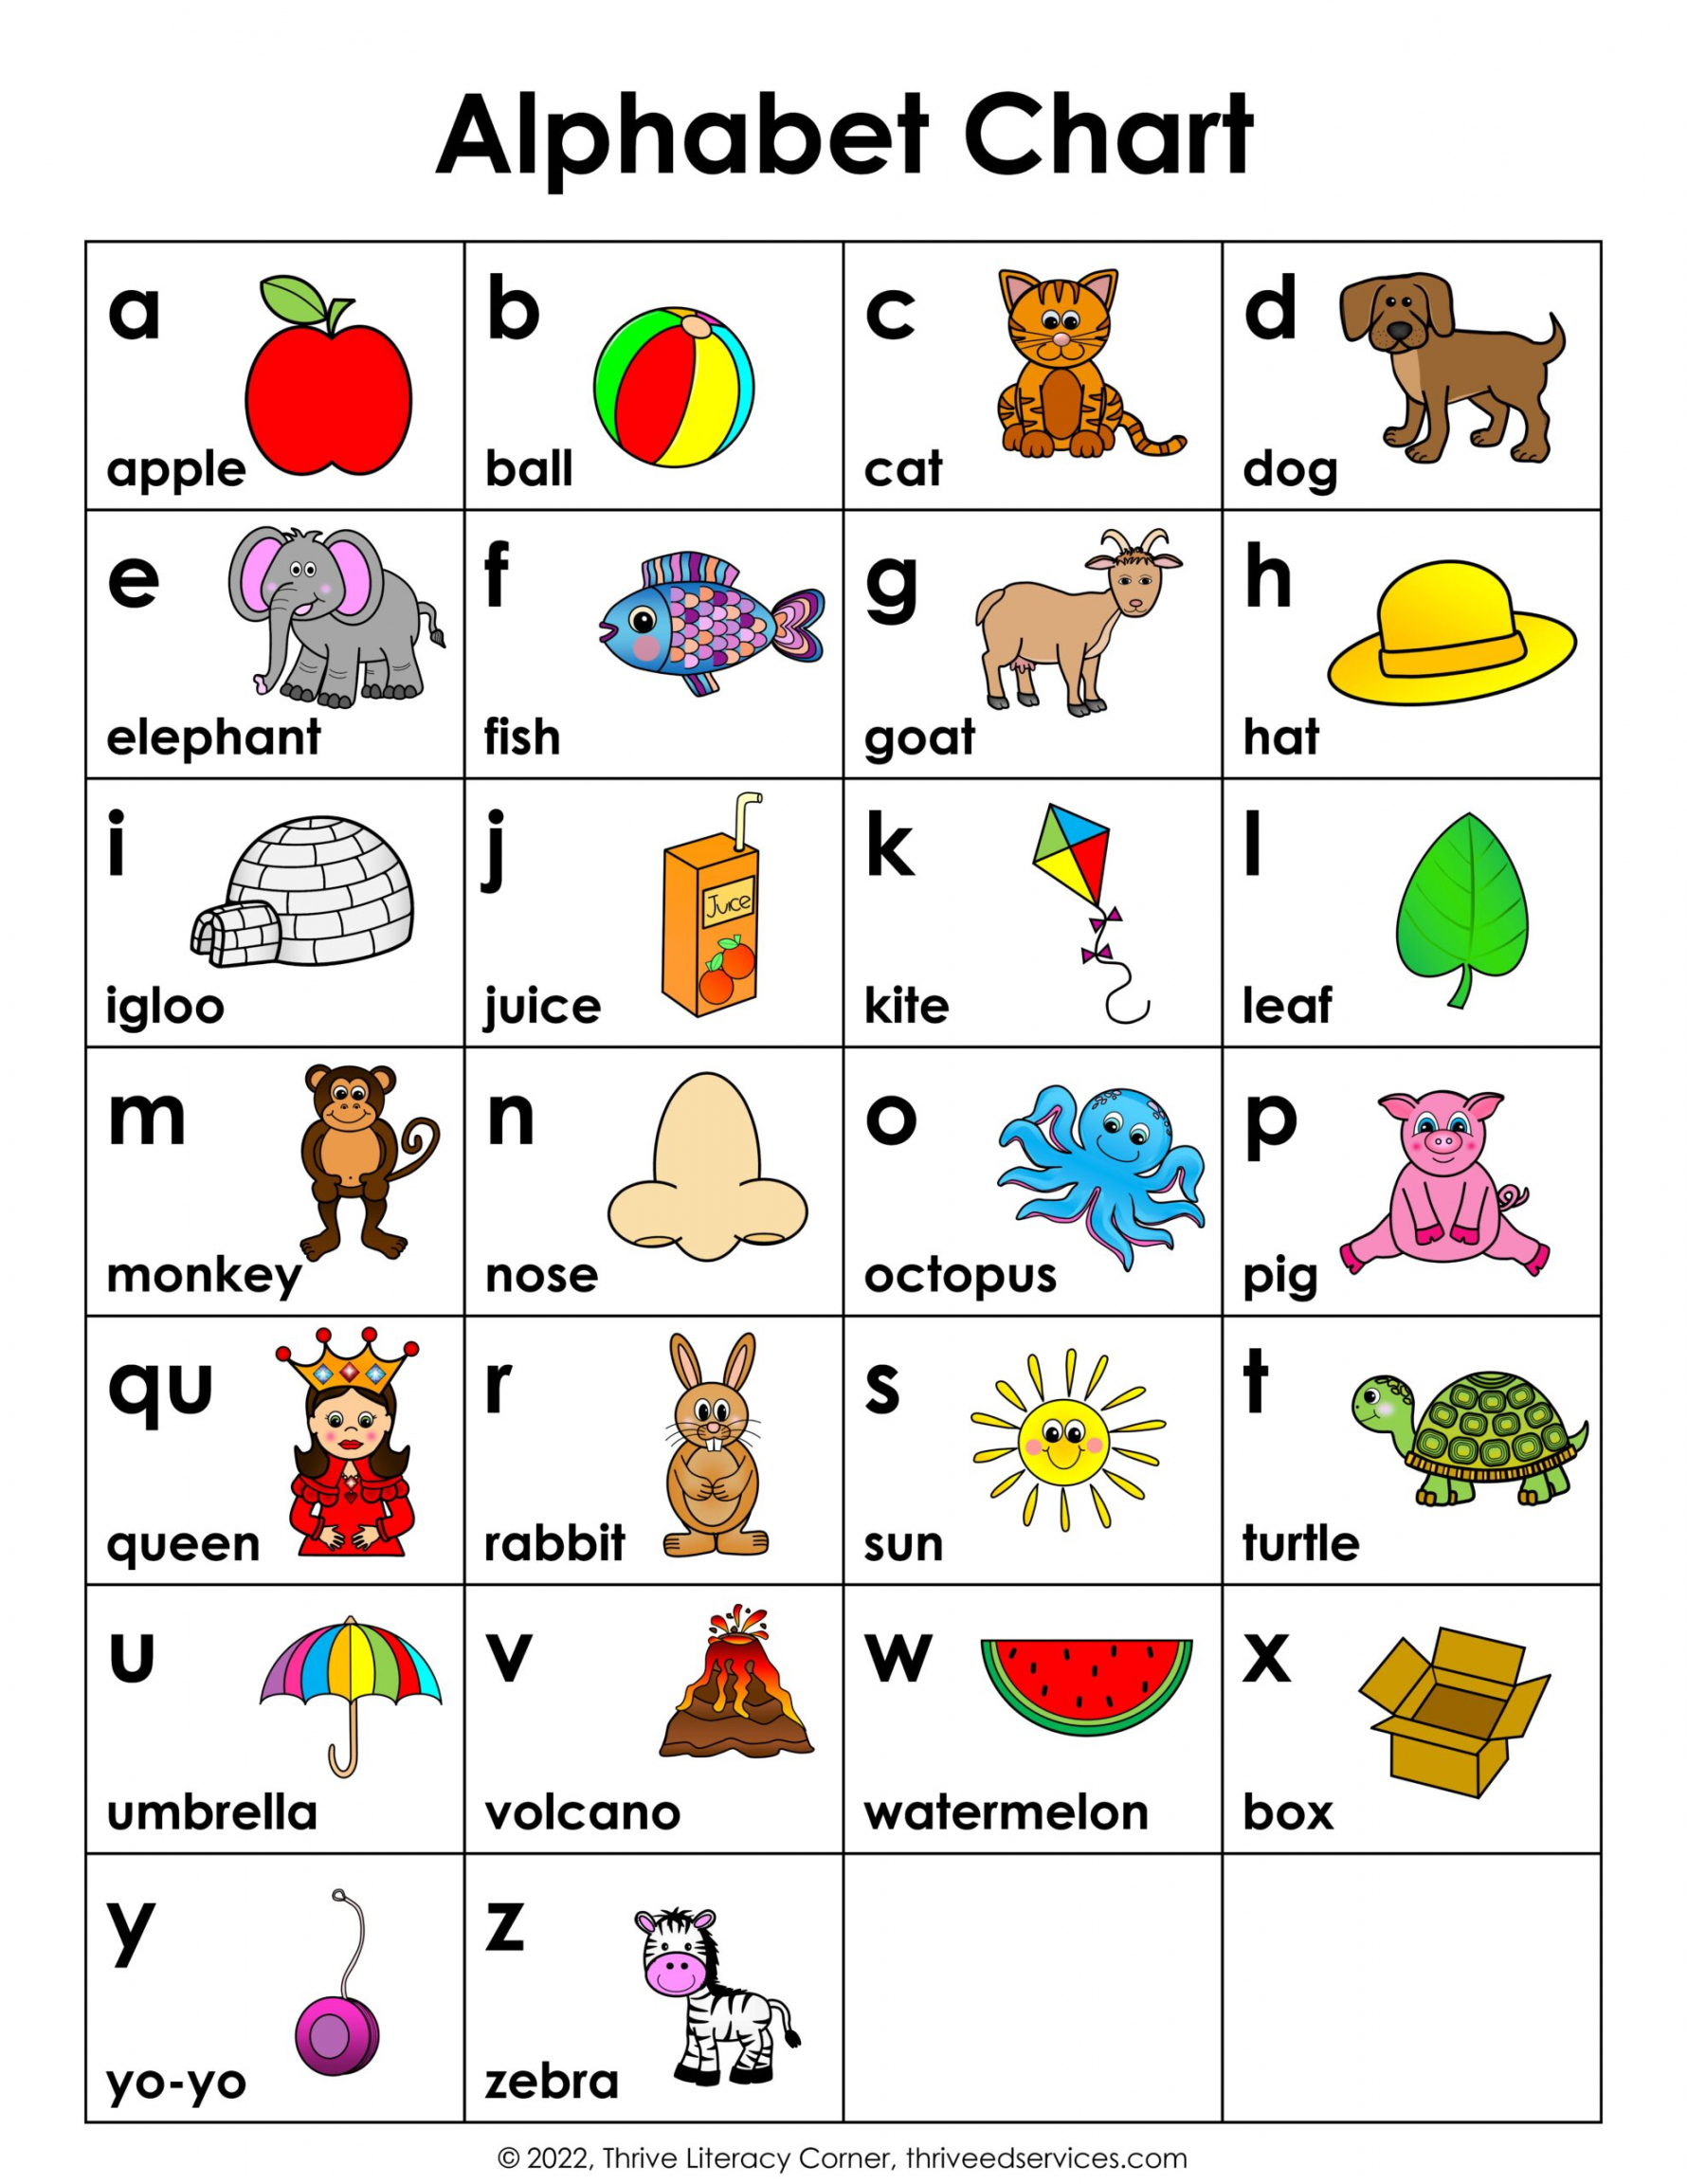 ABC Chart: How To Use An Alphabet Chart+ Free Printable - FREE Printables - Alphabet Chart Free Printable